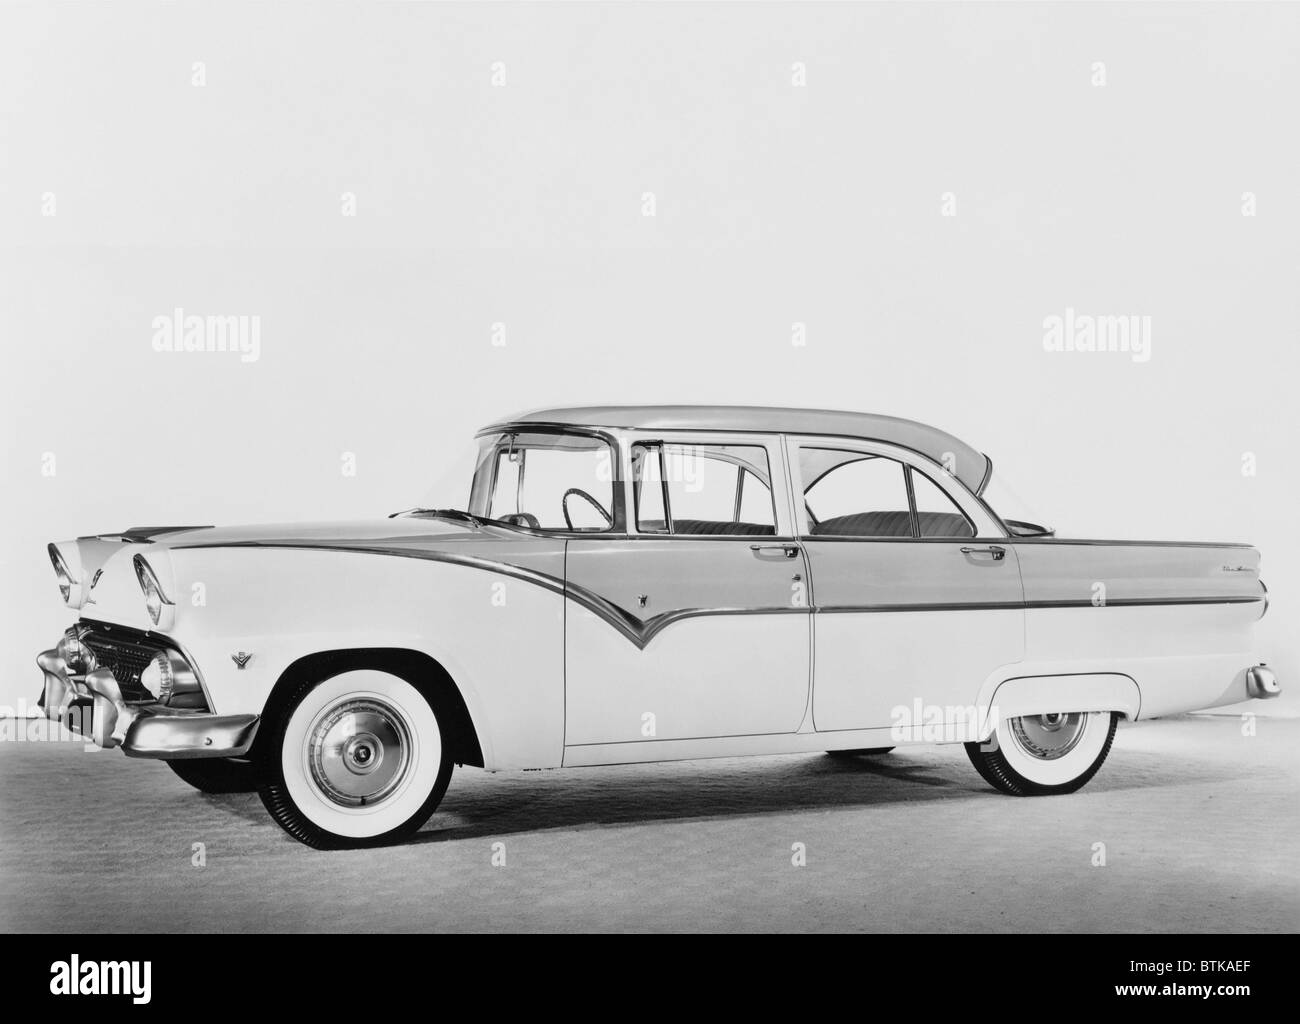 1955 Ford four-door sedan featured two-tone paint, heavy chrome detail, white wall tires, wrap around windshield, and a hint of Stock Photo